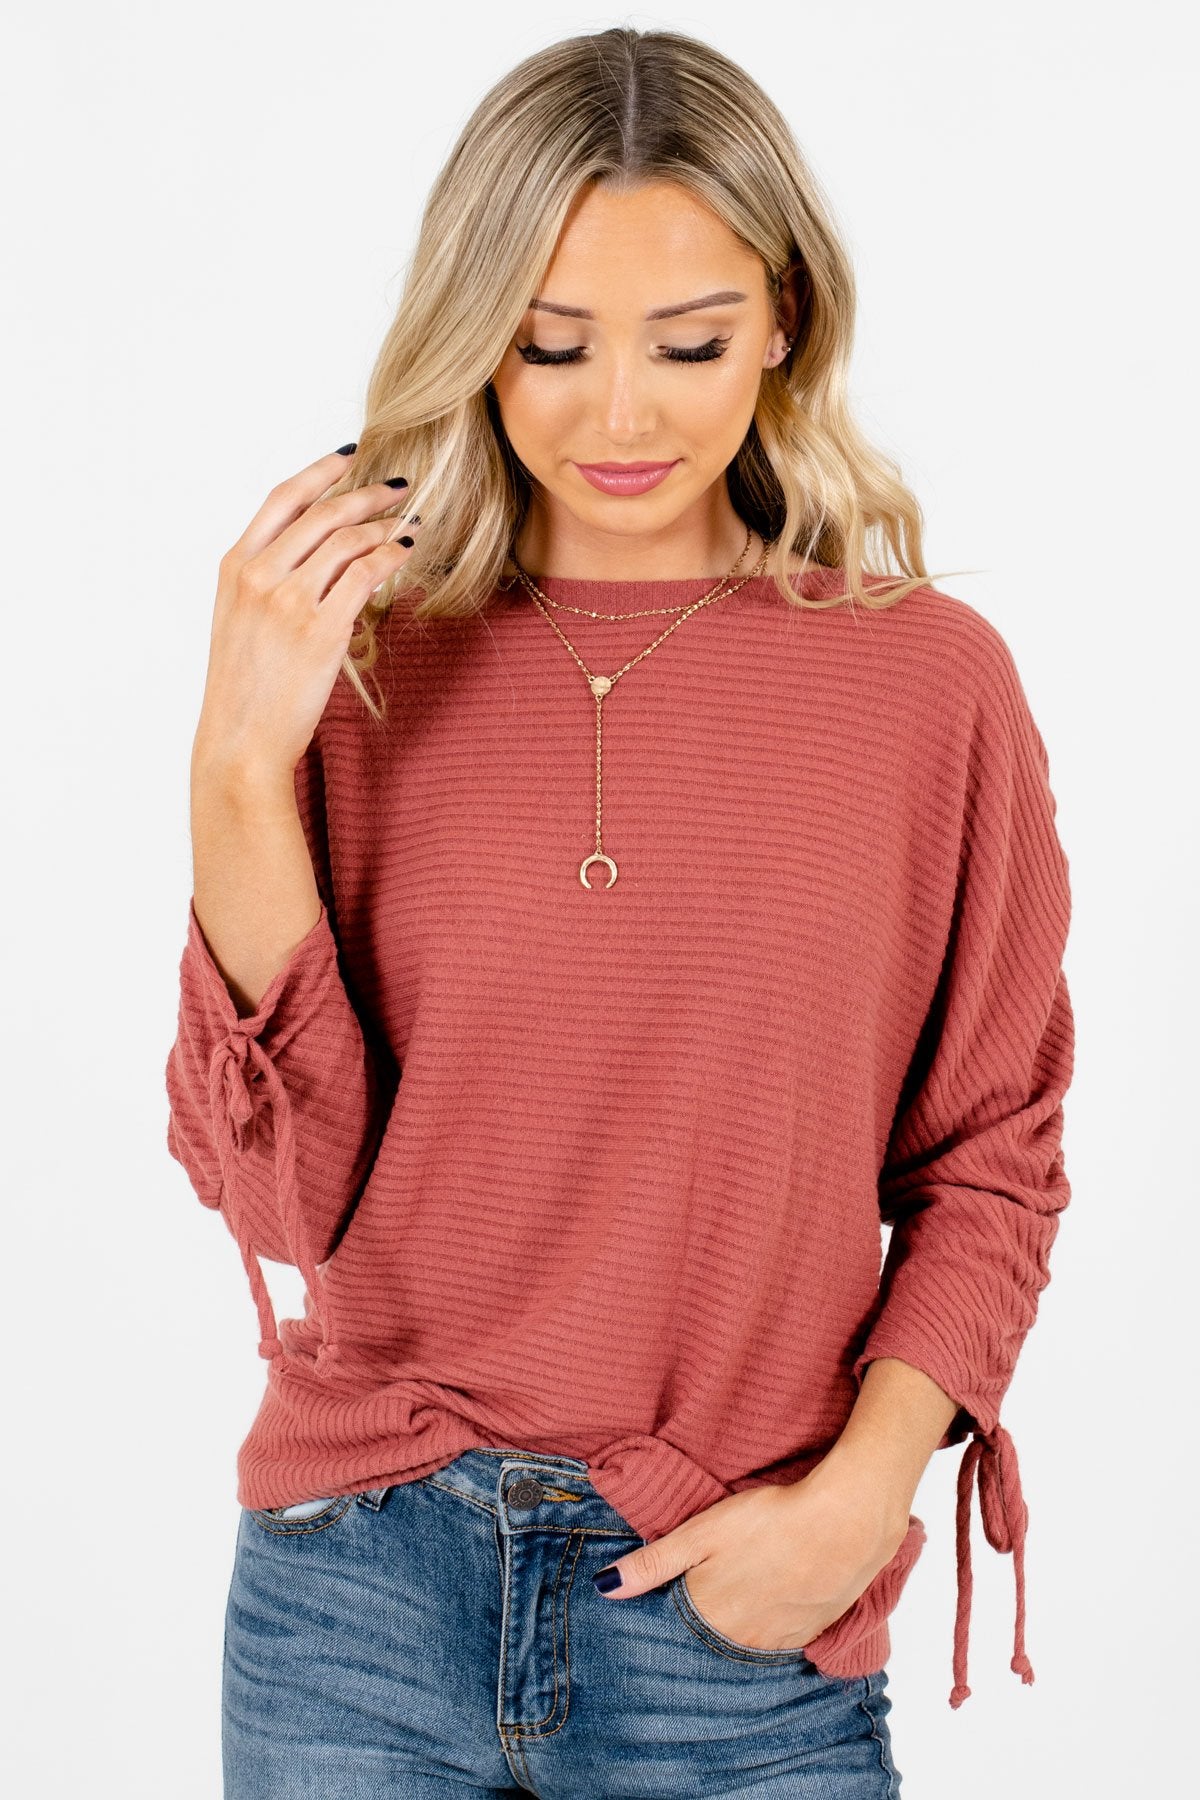 Women's Pink Warm and Cozy Boutique Tops